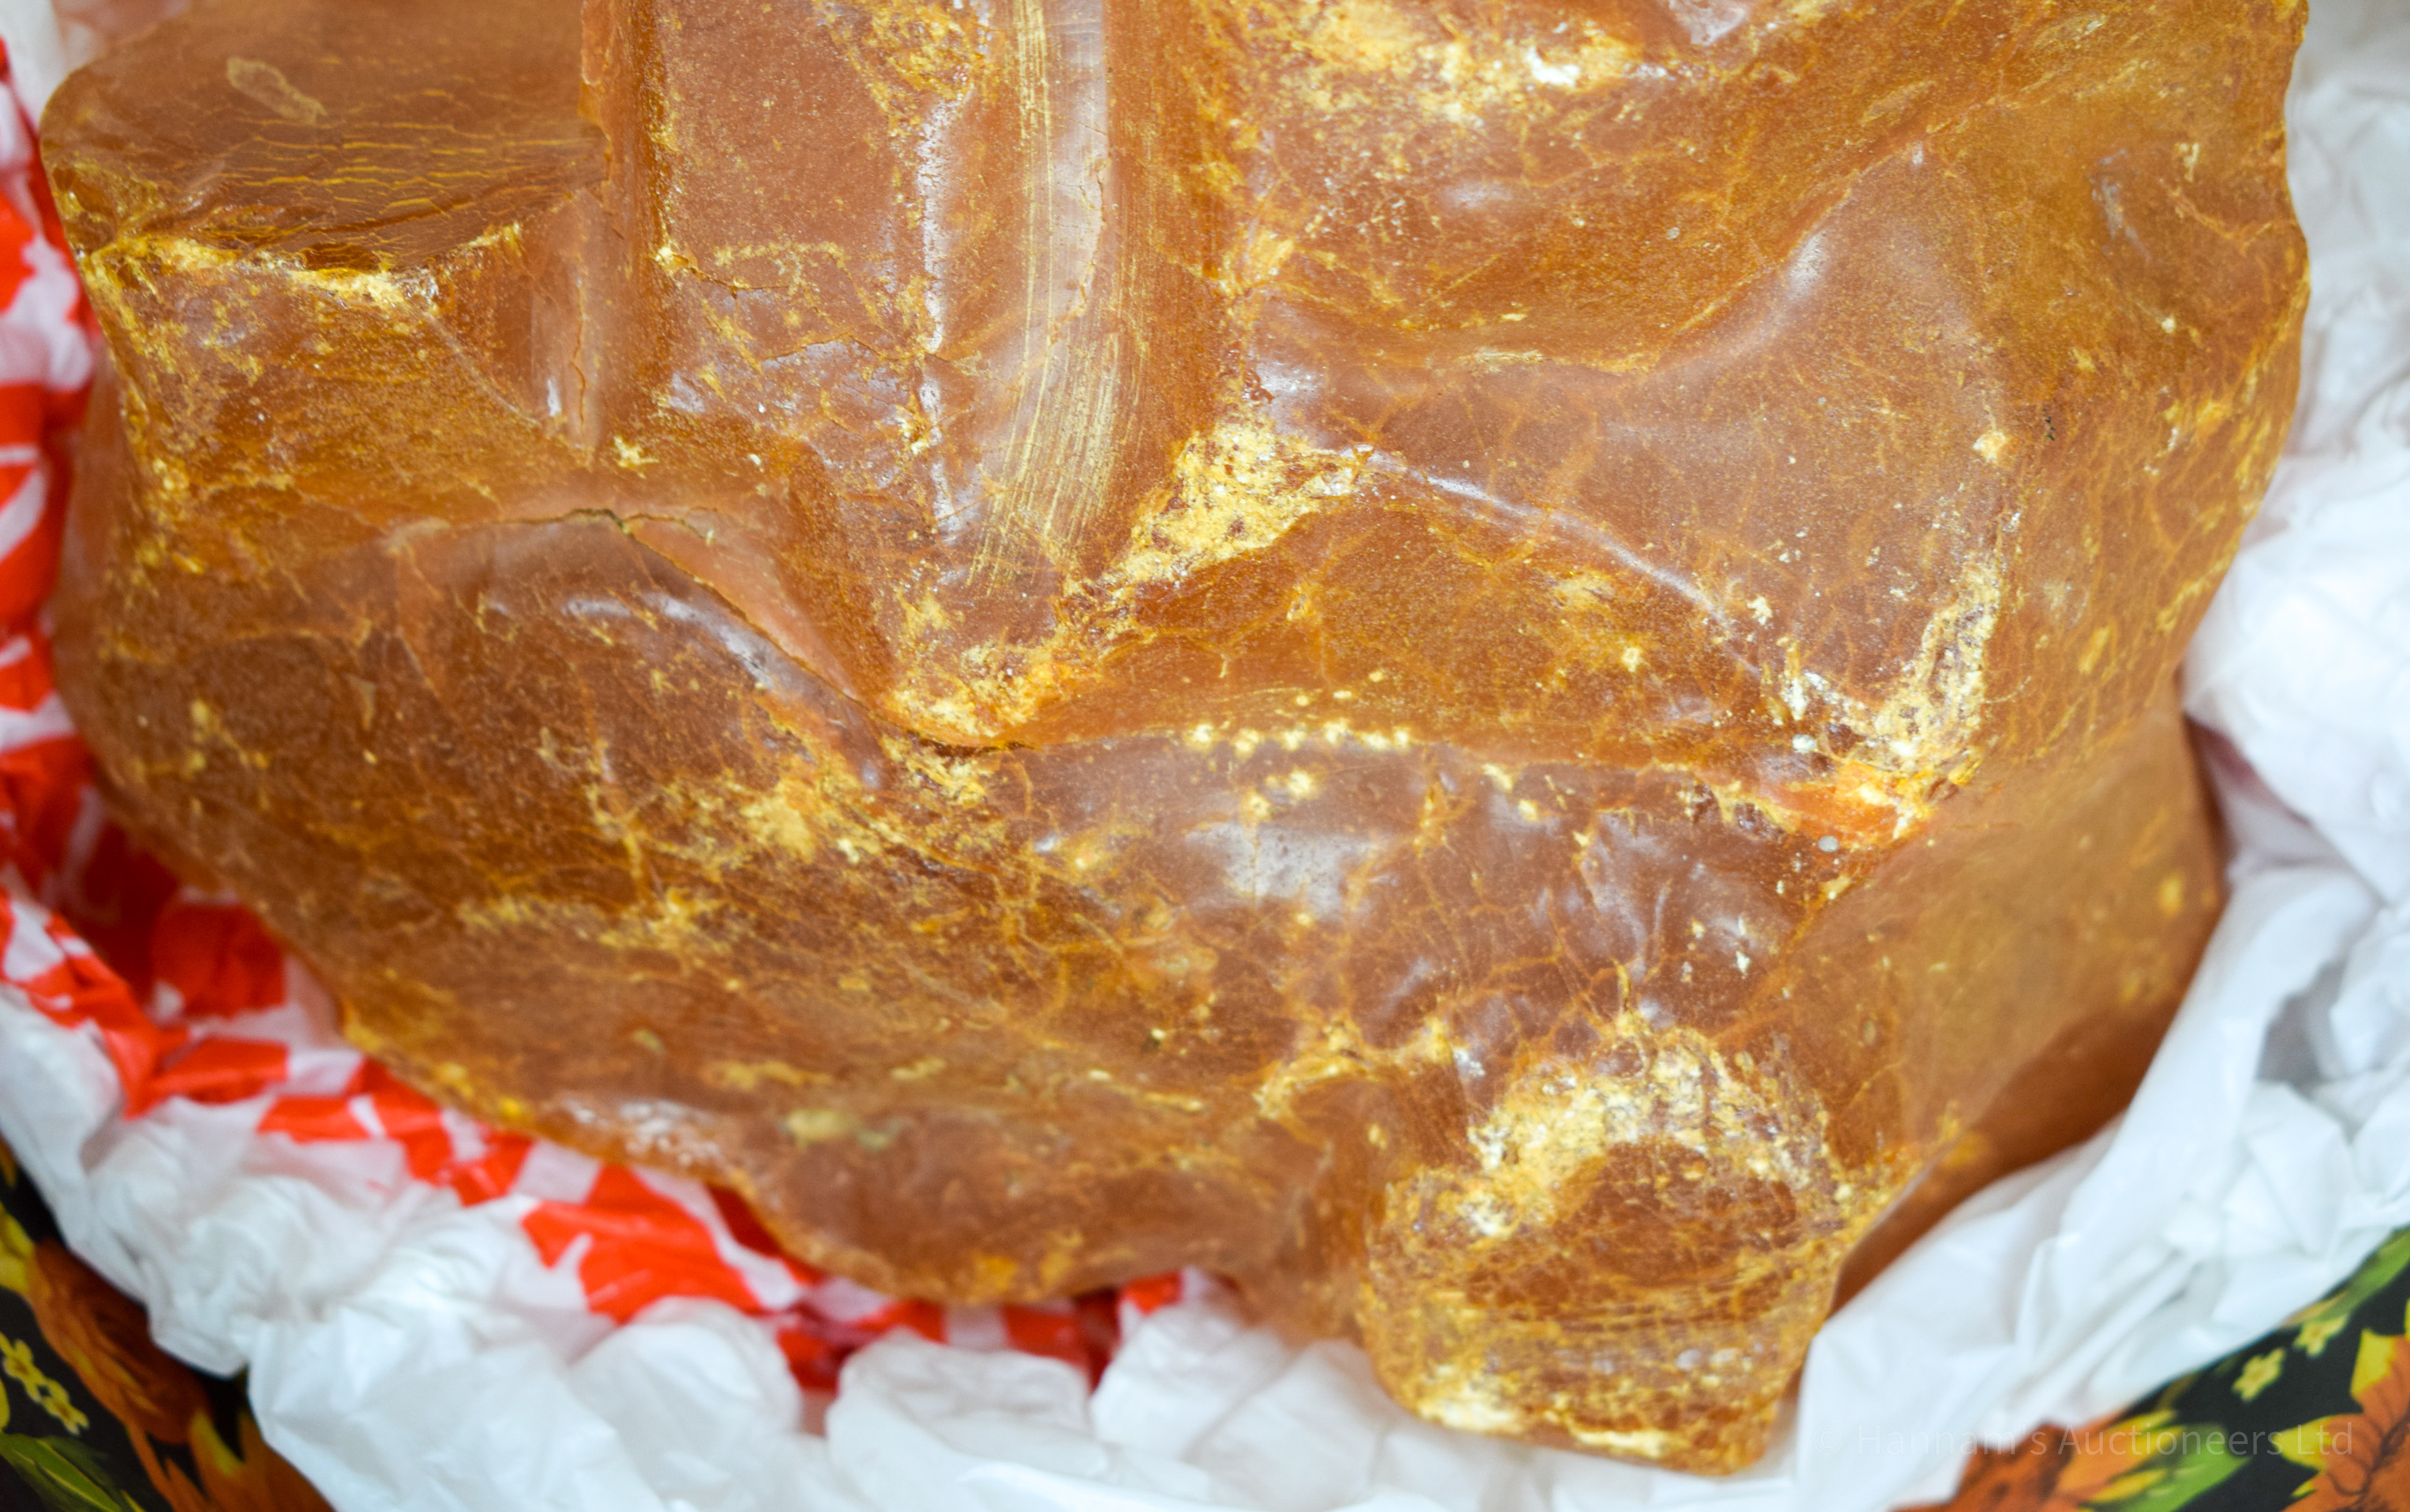 A VERY LARGE AMBER SPECIMEN 2.6 kgs. 20 cm x 16 cm. - Image 3 of 9